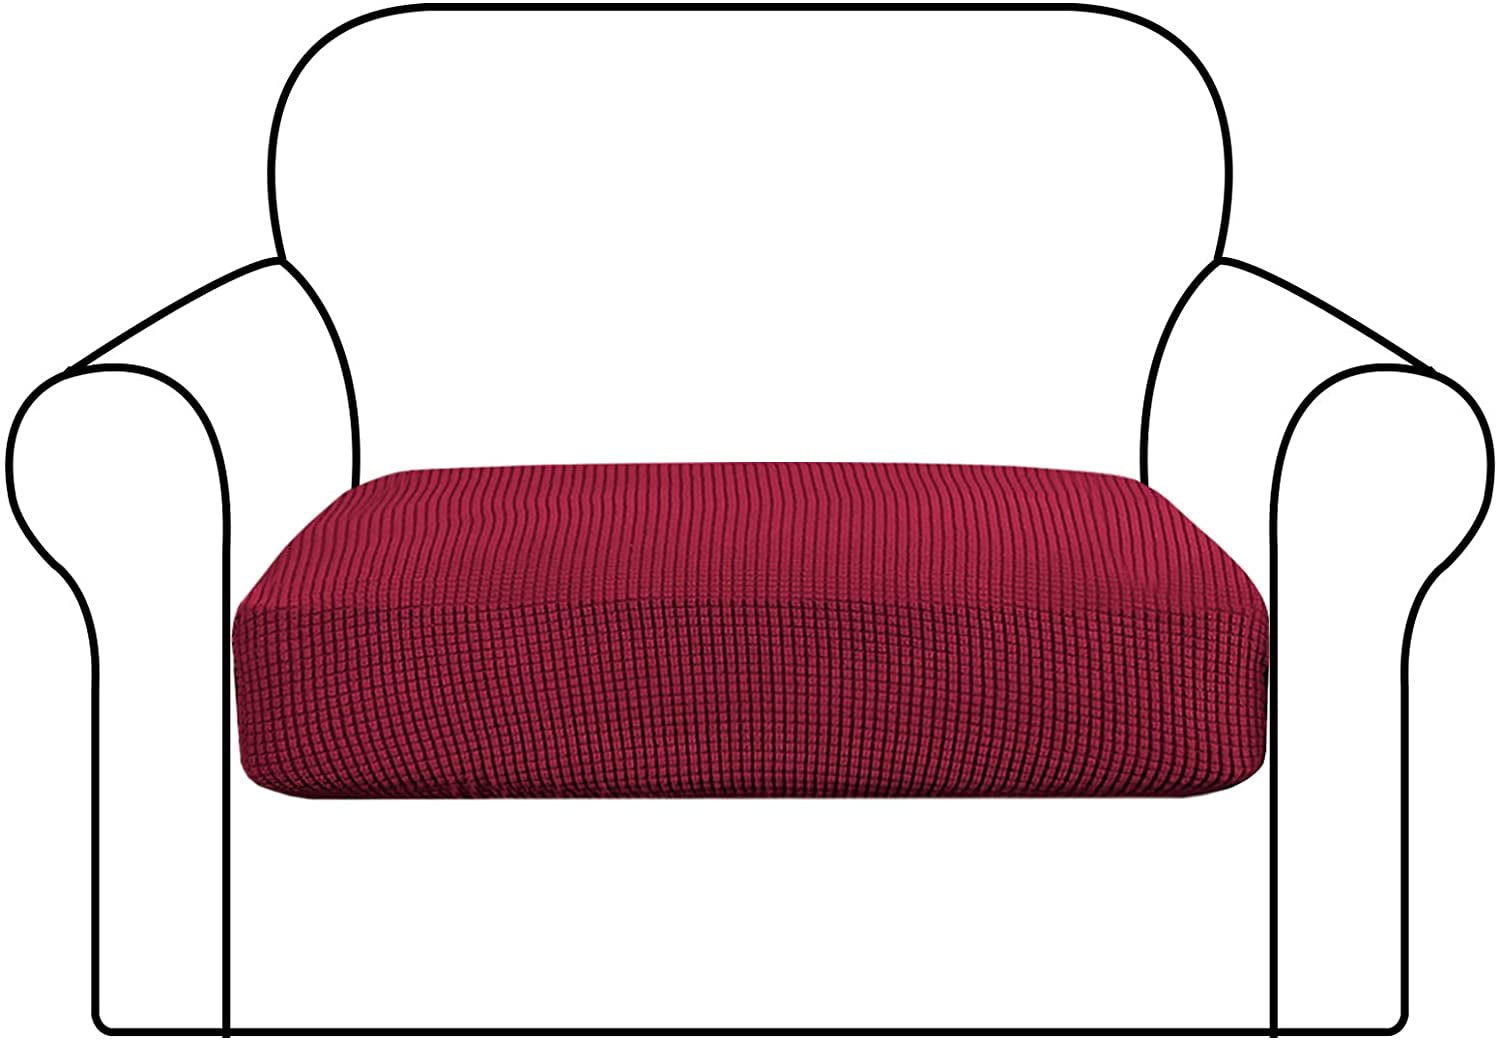 Chair, Burgundy Stretch Chair Cushion Cover Burgundy Sofa Cushion Furniture Protector for Stretch Chair Seat Covers Soft Stretch Spandex Skid Resistance with Elastic Bottom Sofa Slipcover